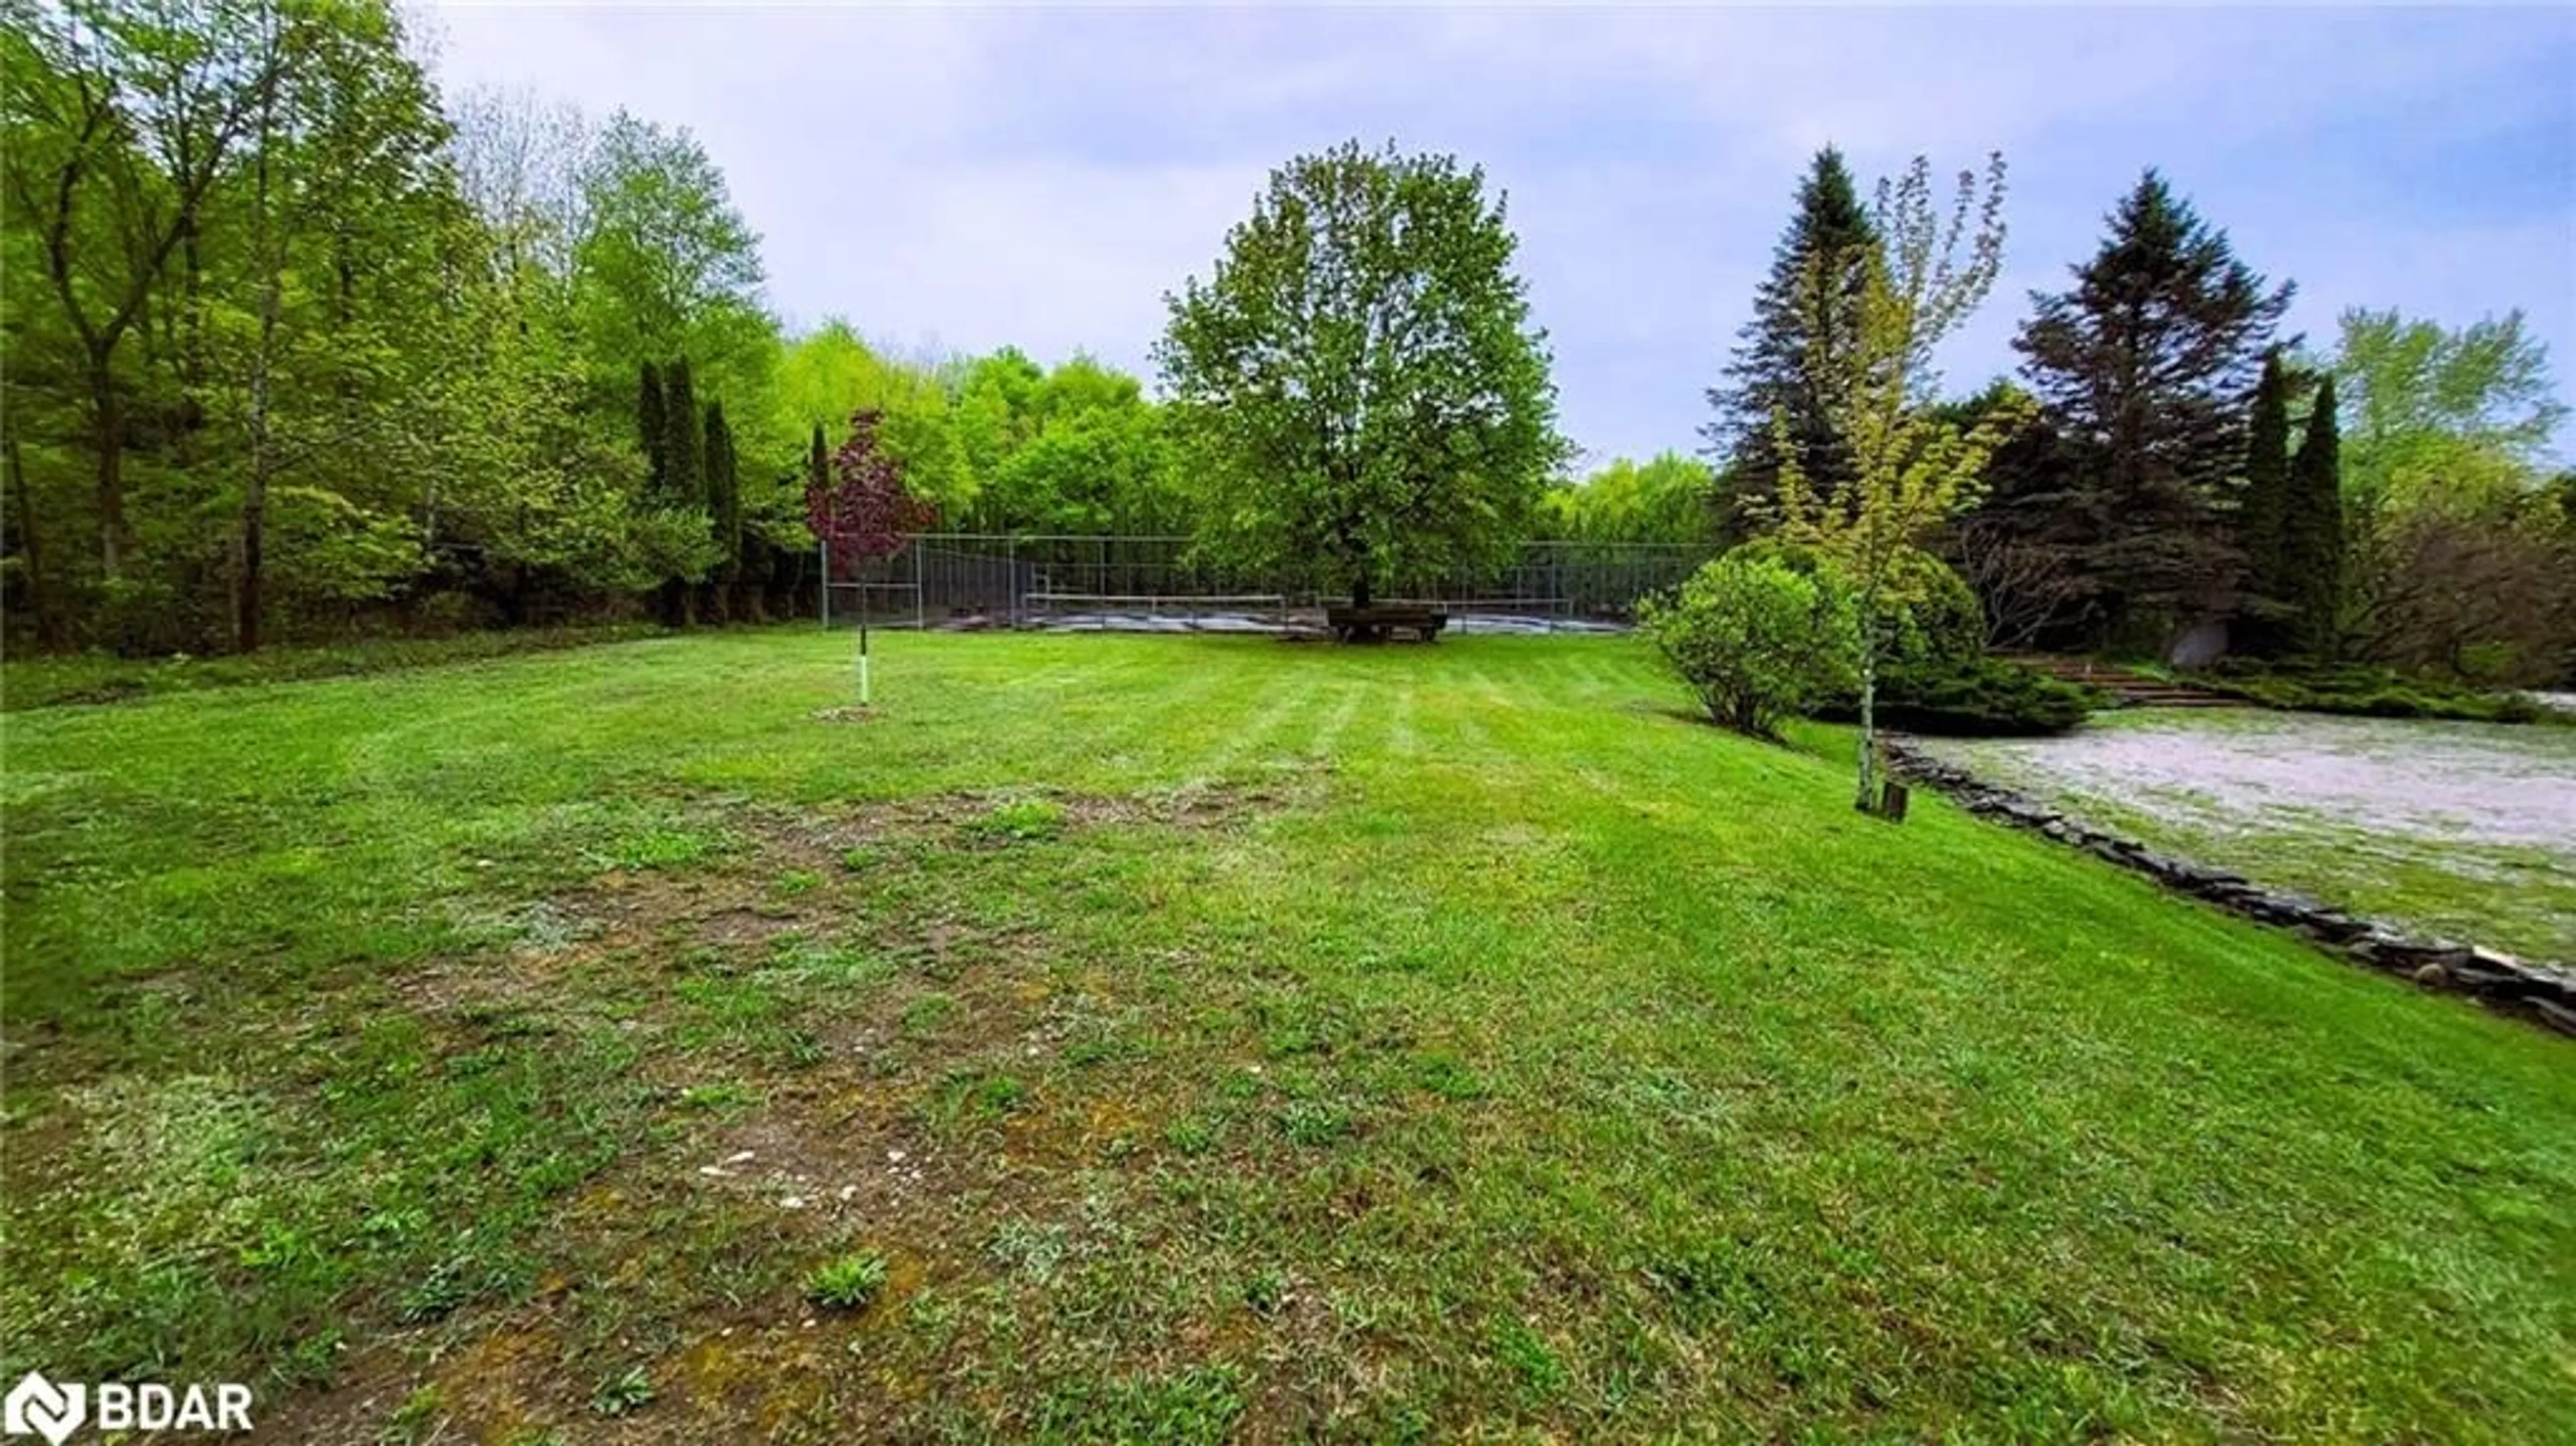 Fenced yard for 3 Forest Wood Lane, Oro-Medonte Ontario L0L 1T0